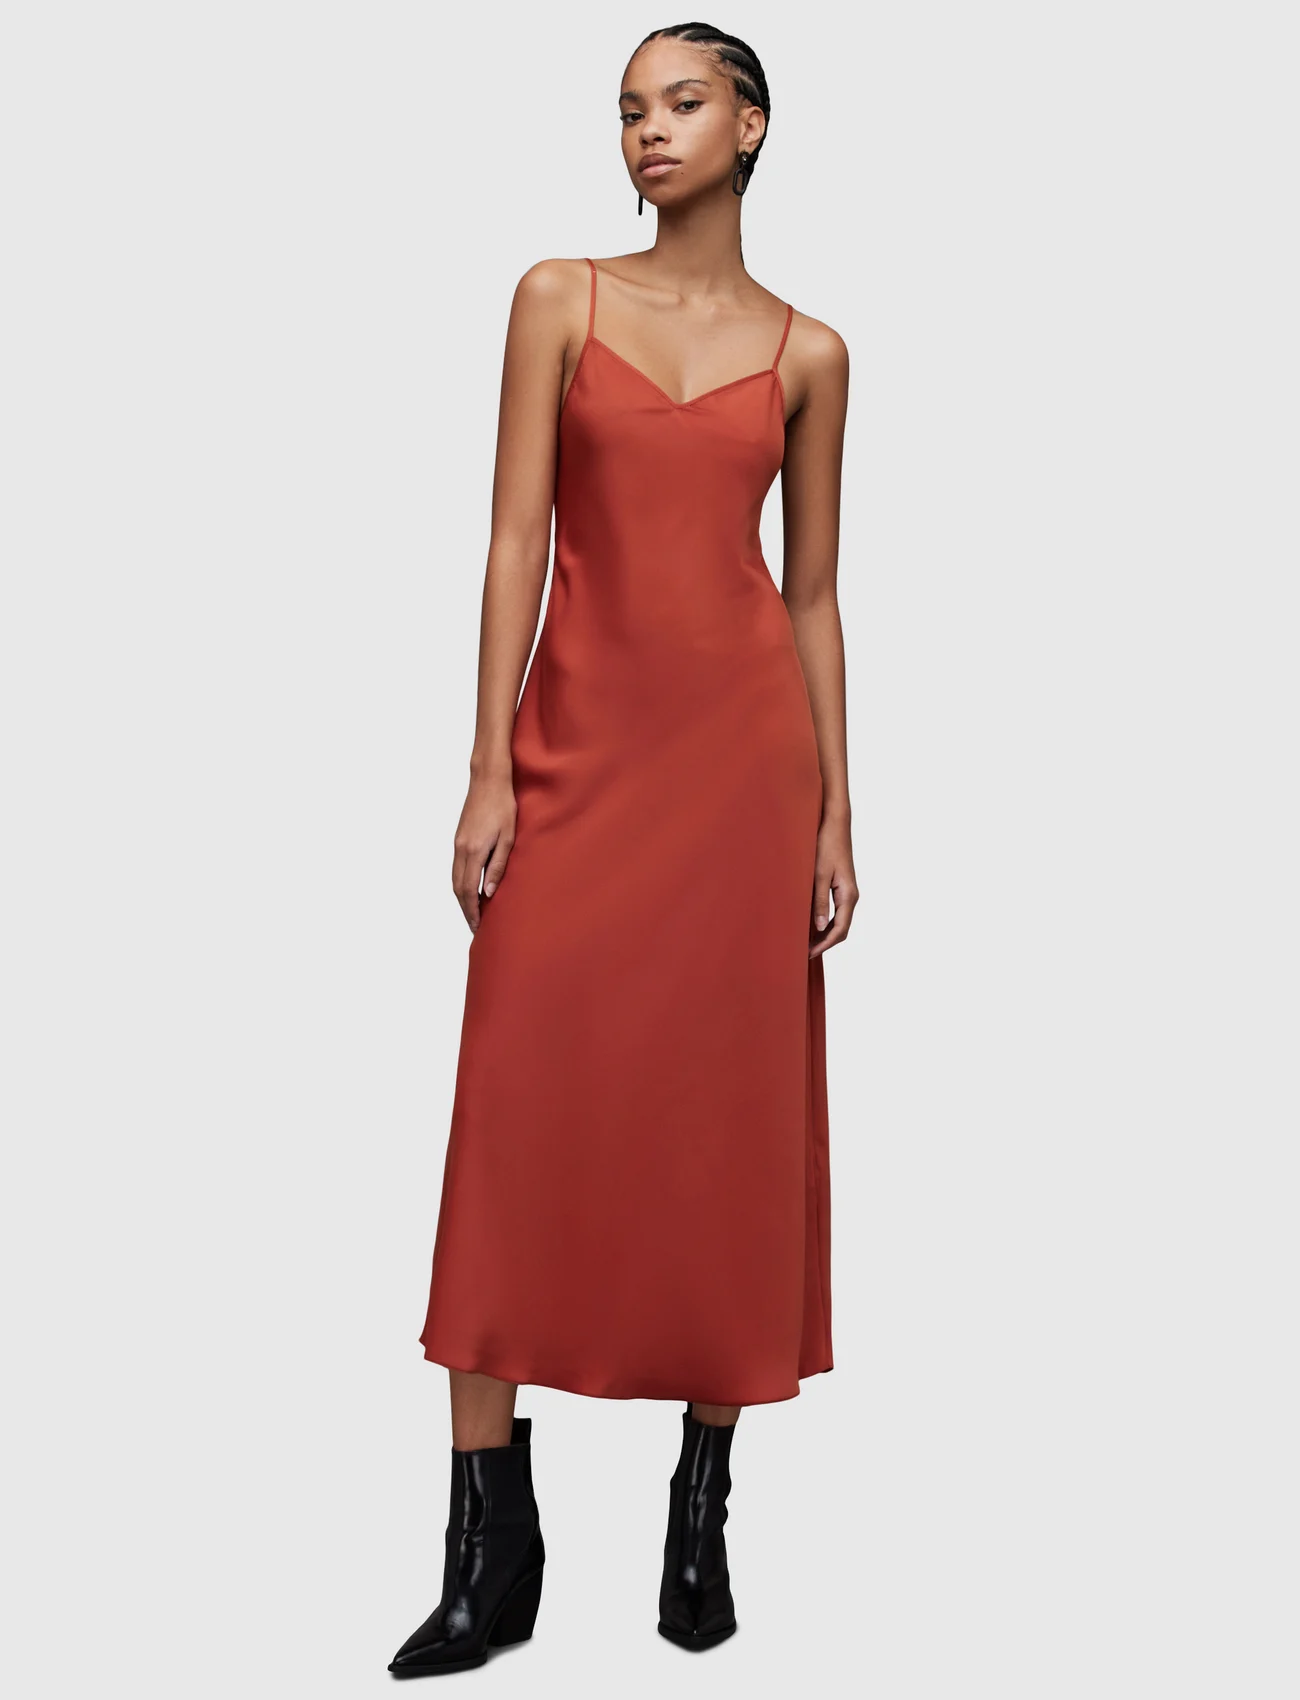 AllSaints - BRYONY DRESS - robes moulantes - planet red - 0